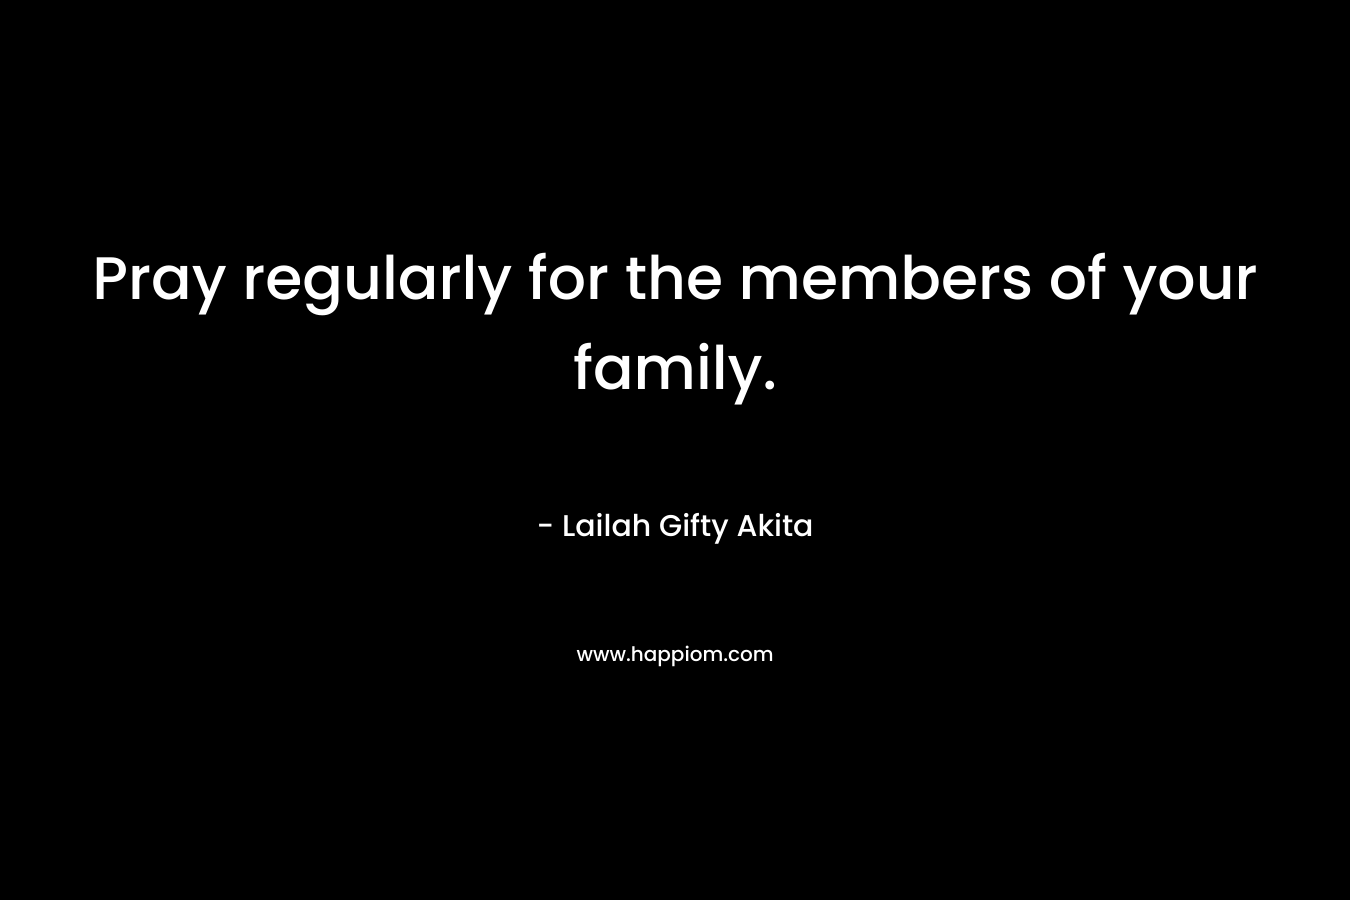 Pray regularly for the members of your family.